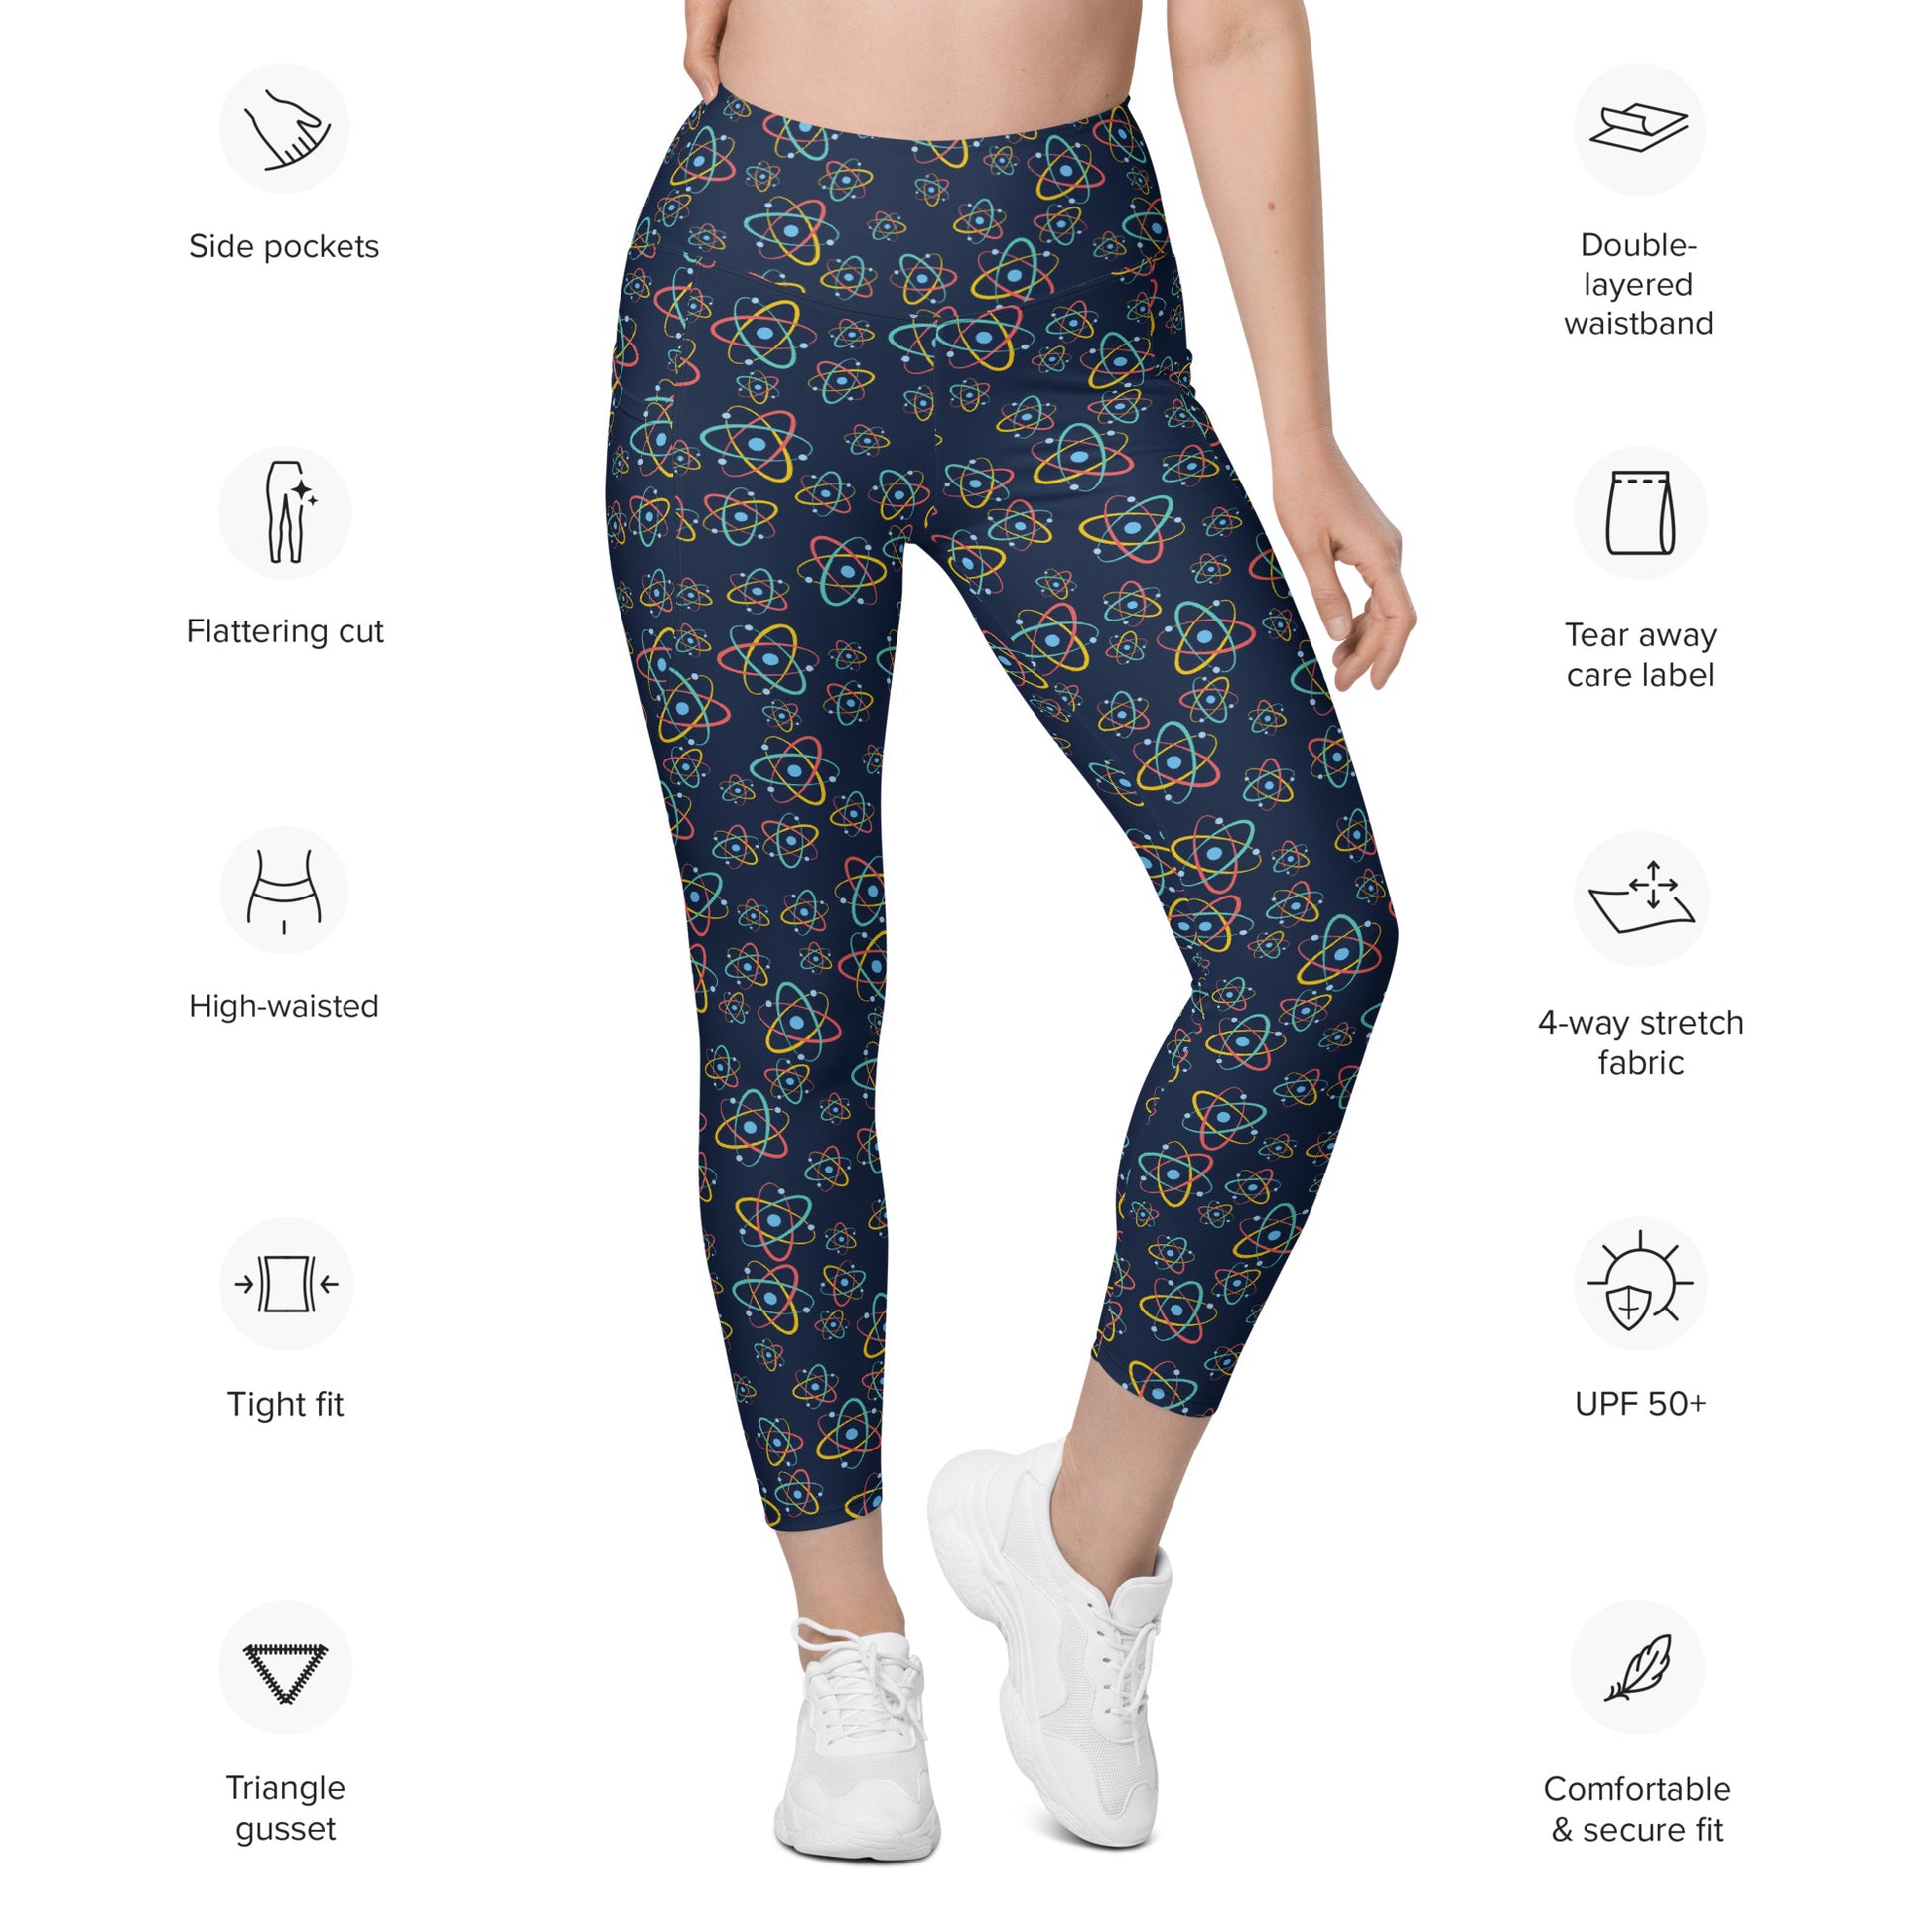 Atoms - Leggings with pockets, 2XS - 6XL Leggings With Pockets 2XS - 6XL (US)